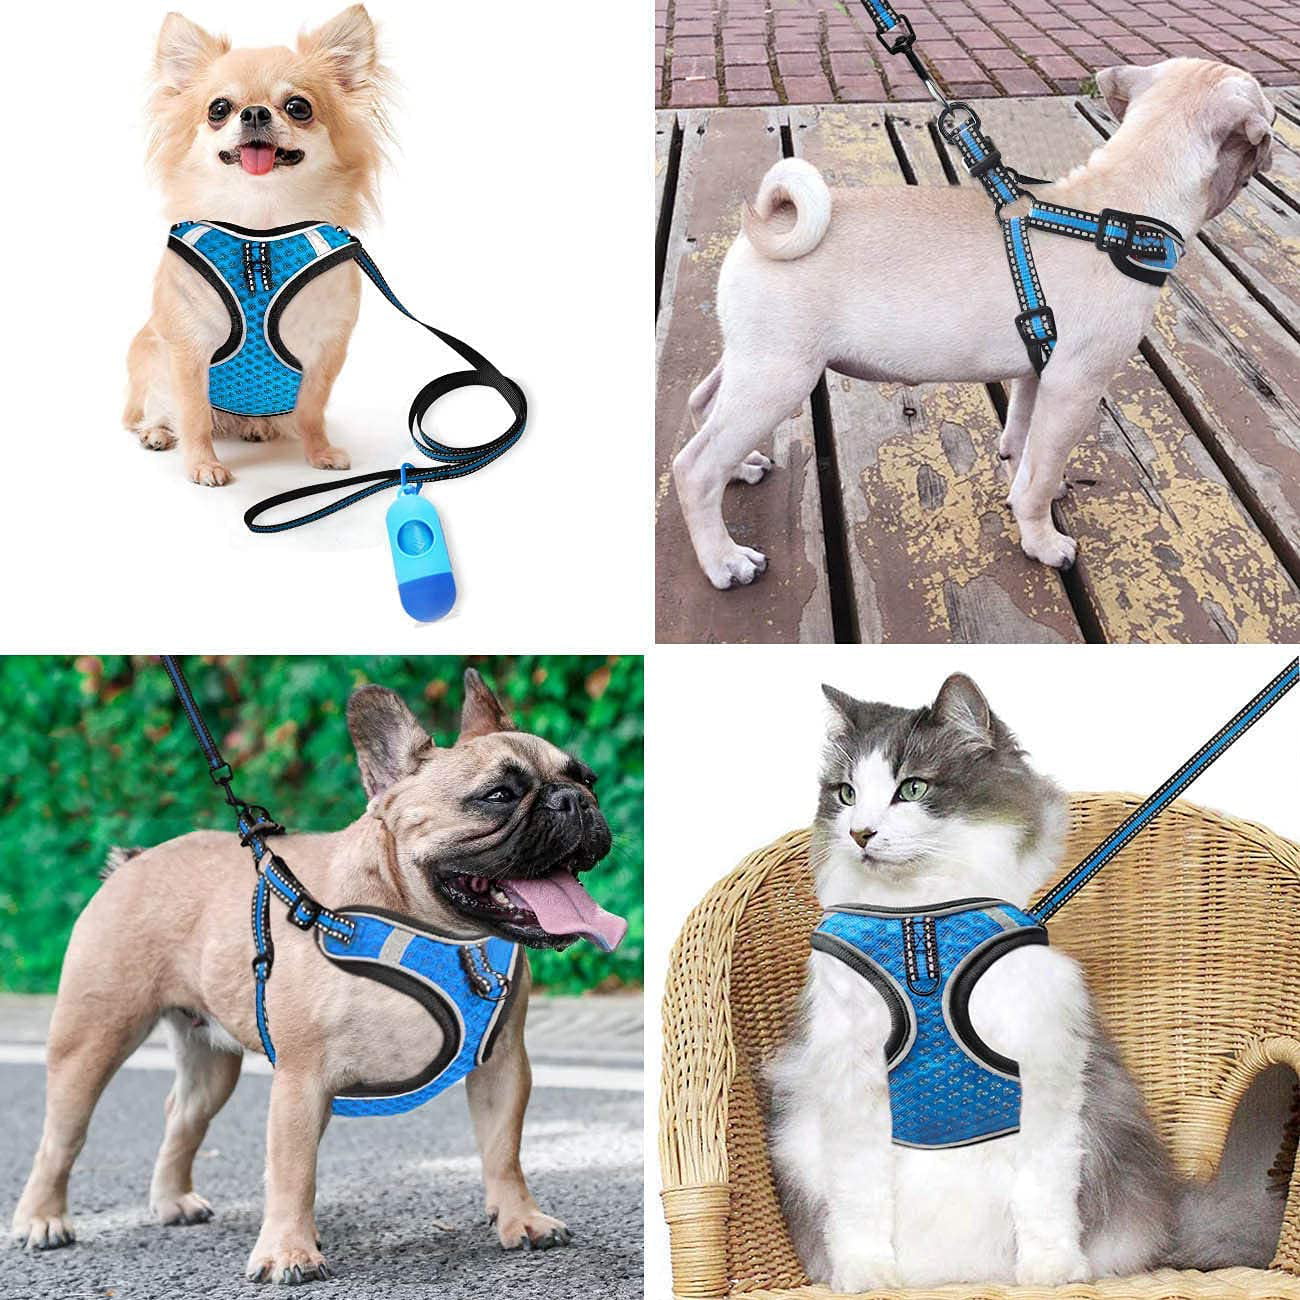 Btromeshy Step-in Dog Harness,Small Dog Harness and Leash Set,Adjustable 3M Reflective Pet Dog Vest for Puppy,Soft Air Mesh Step-in Harness for Small Medium Breed 